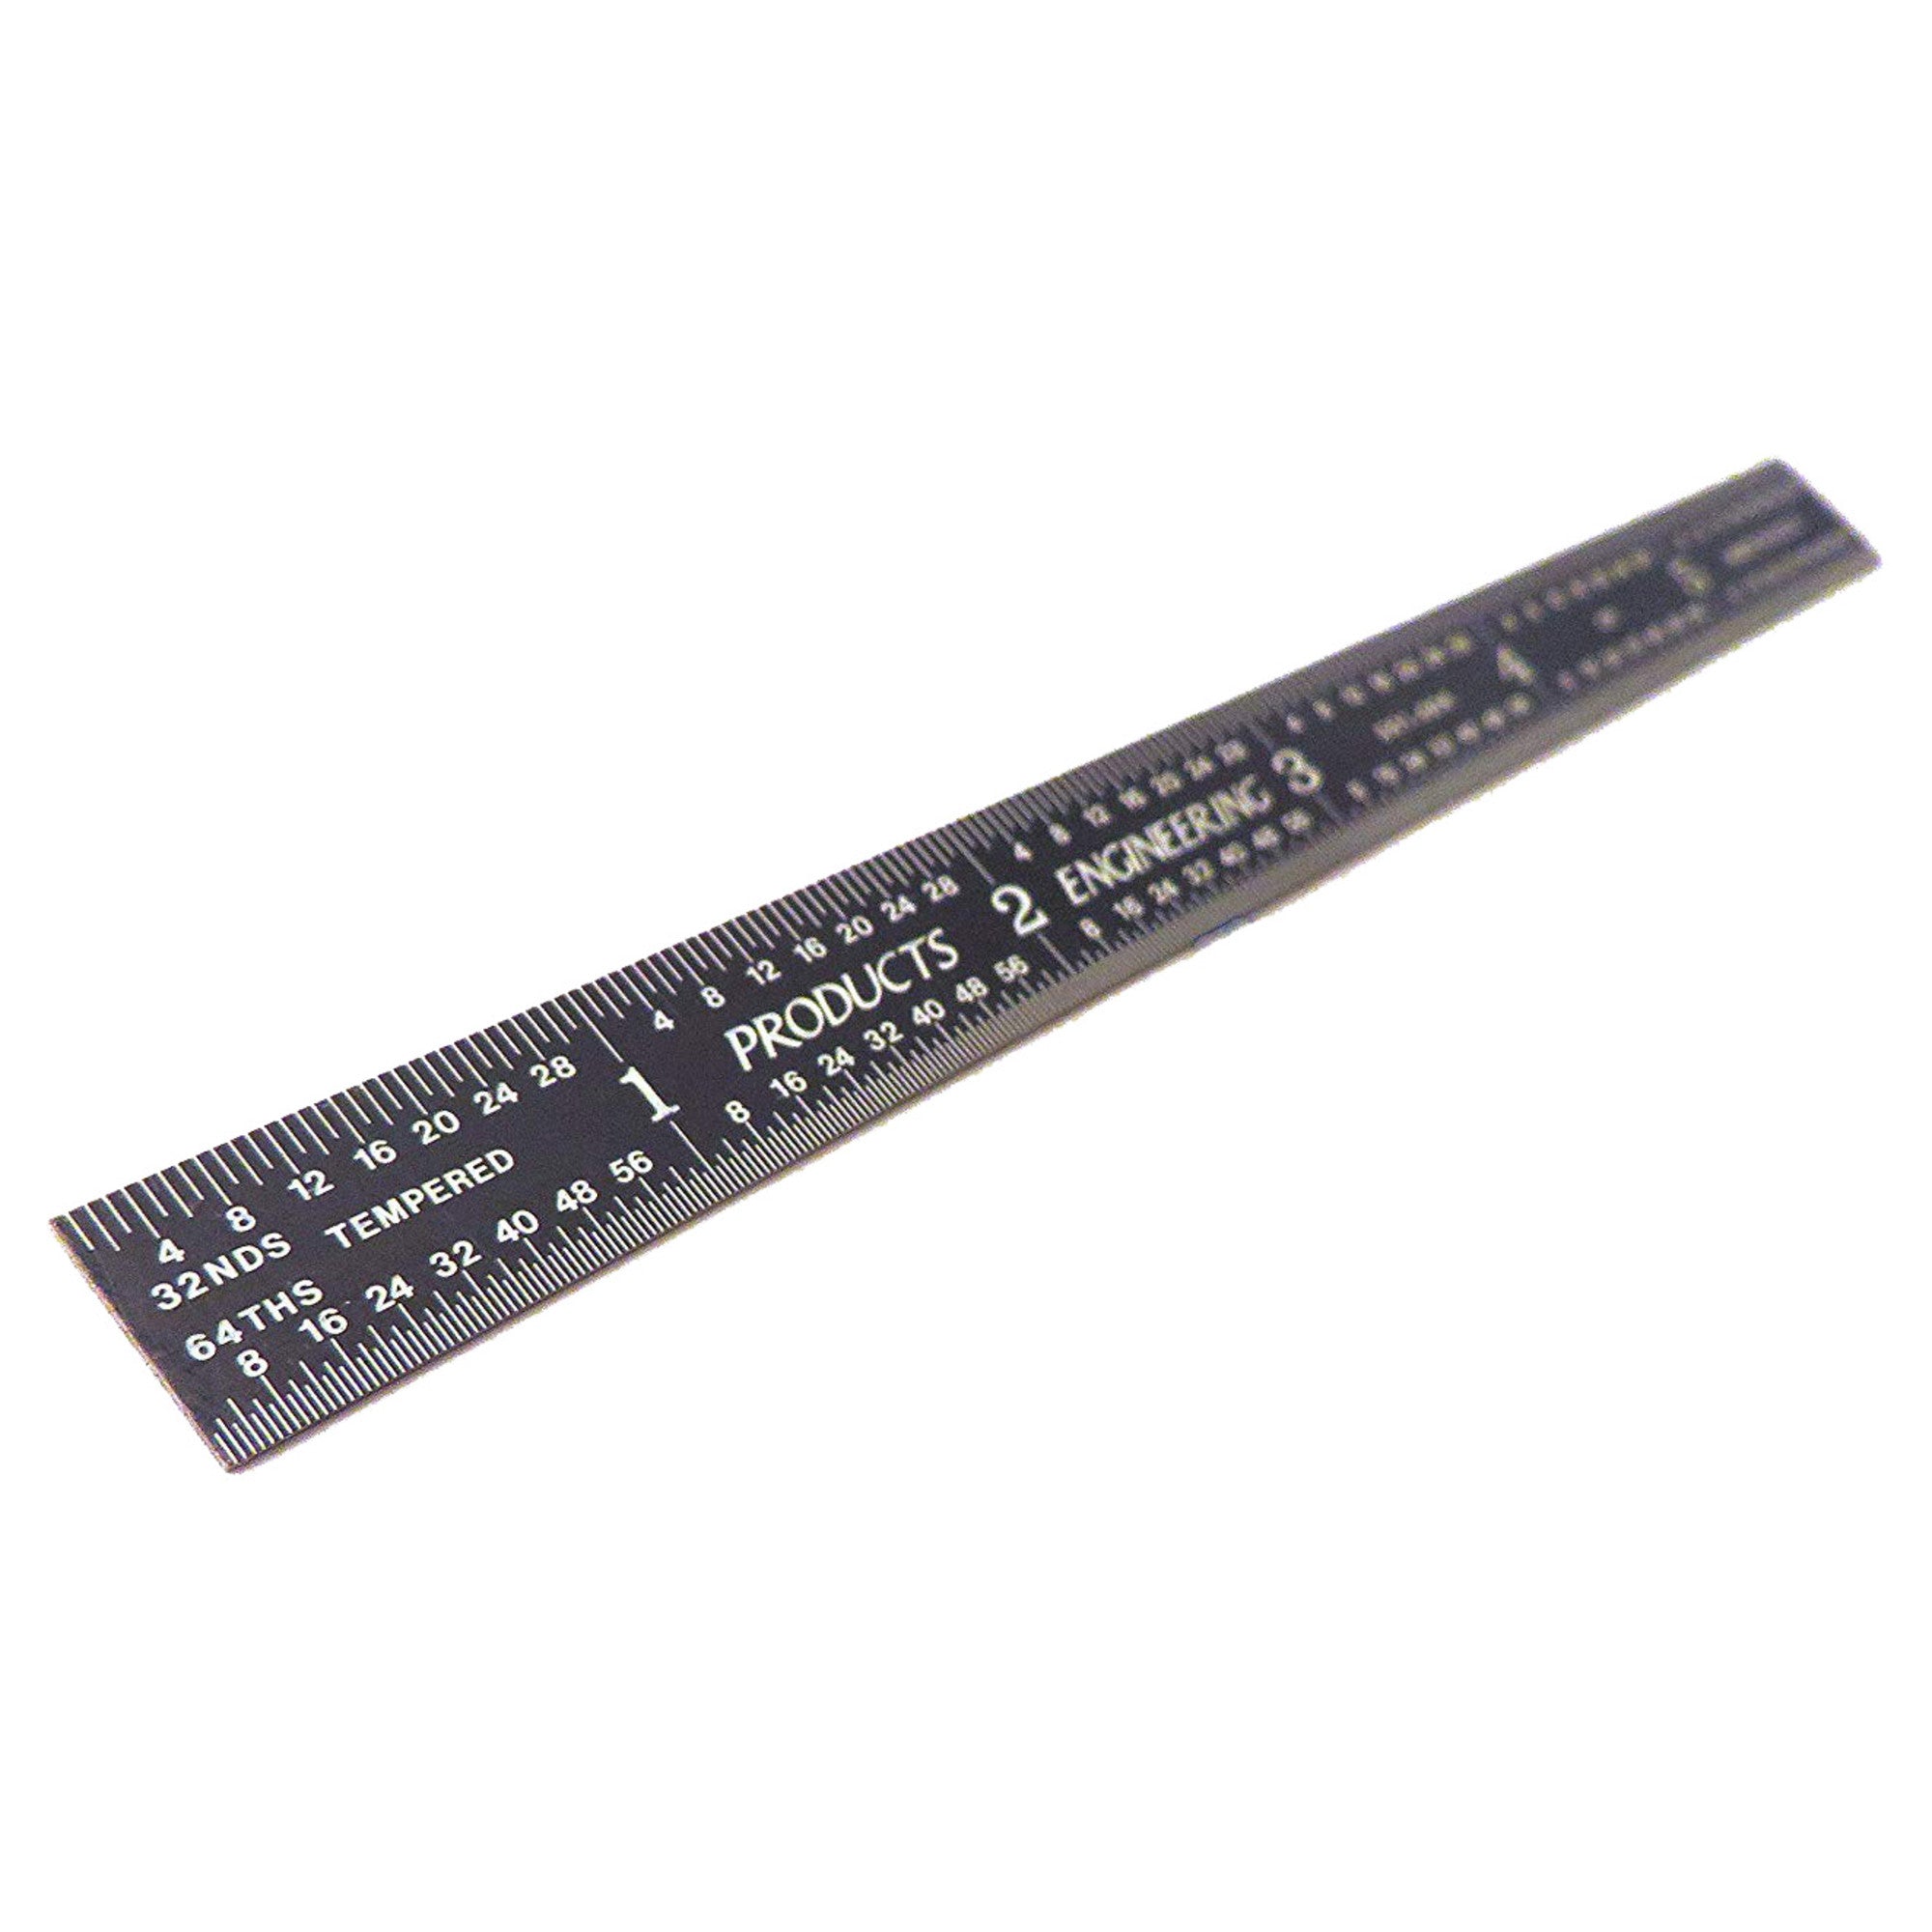 Buy PEC Tools 6 5R flexible black chrome, High Contrast machinist ruler  with markings 1/10, 1/100, 1/32 and 1/64 at Prime Tools for only $ 17.64